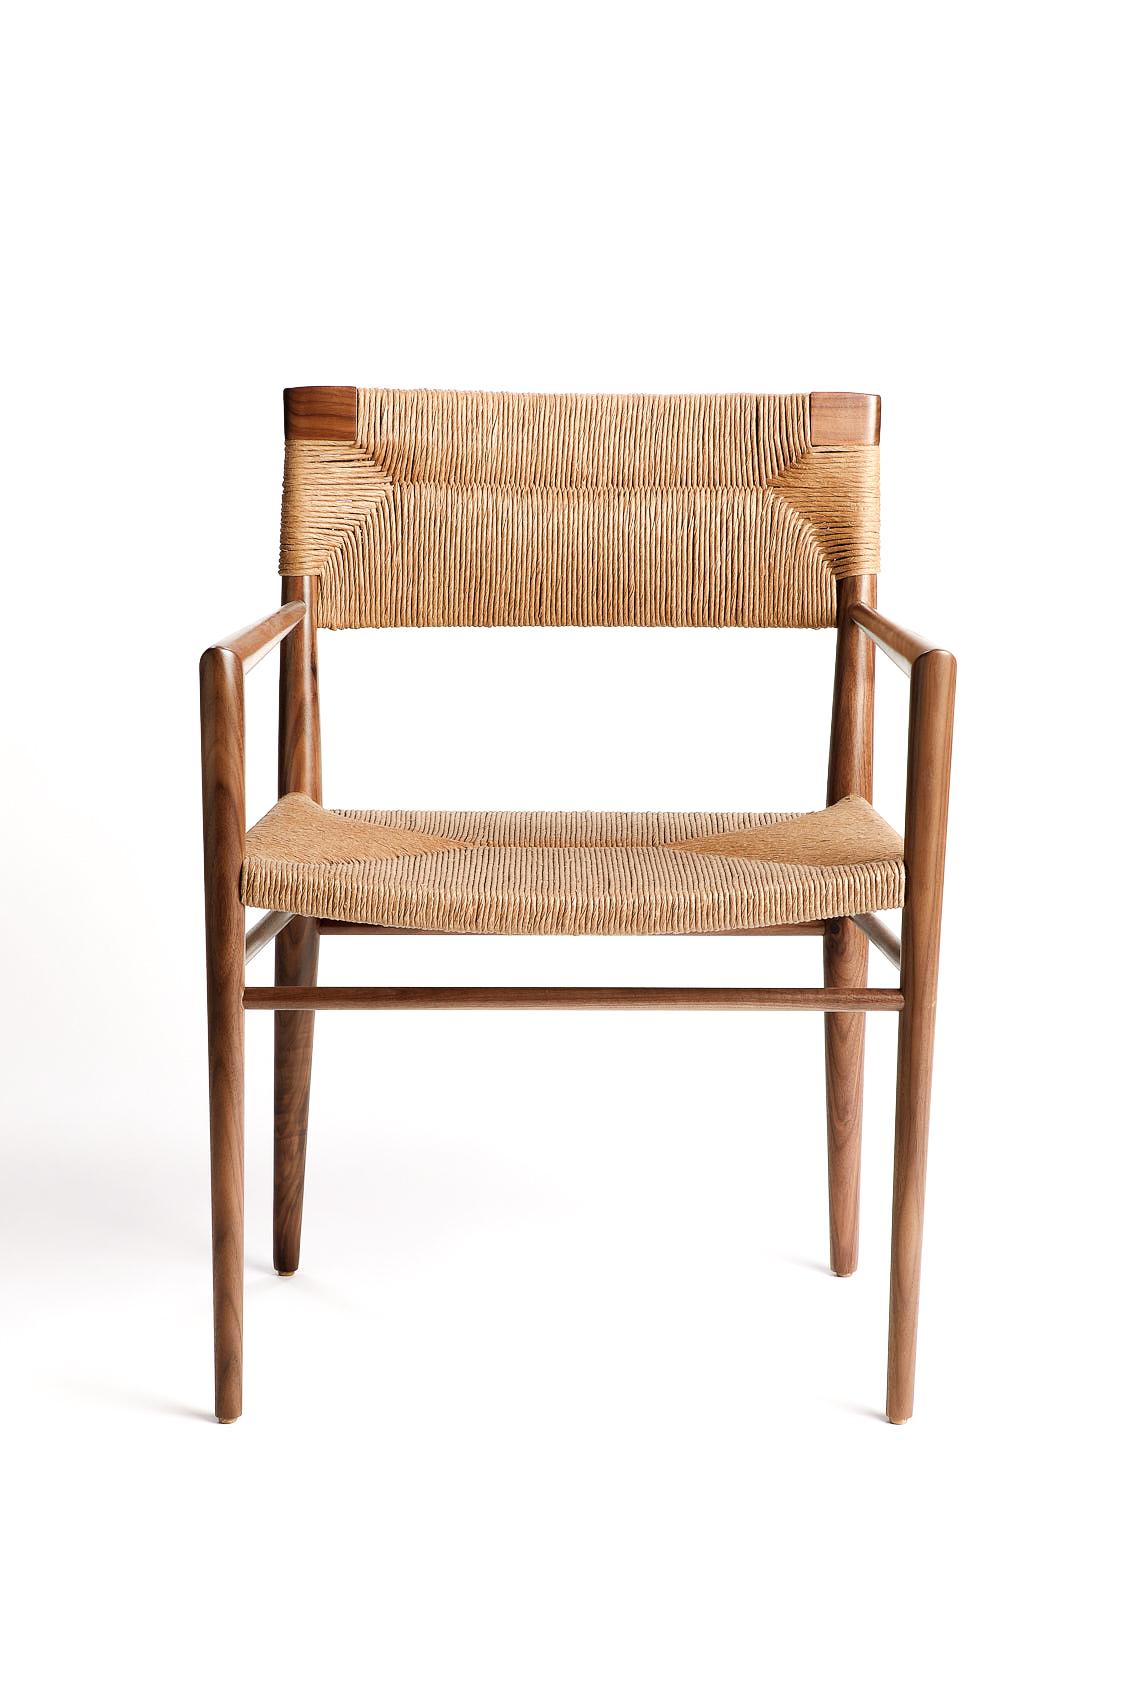 Originally designed by Mel Smilow in 1956 and officially reintroduced by his daughter Judy Smilow in 2018, the woven rush-backed dining armchair is classically midcentury. This collection’s handwoven seating and handcrafted wooden frame provide a